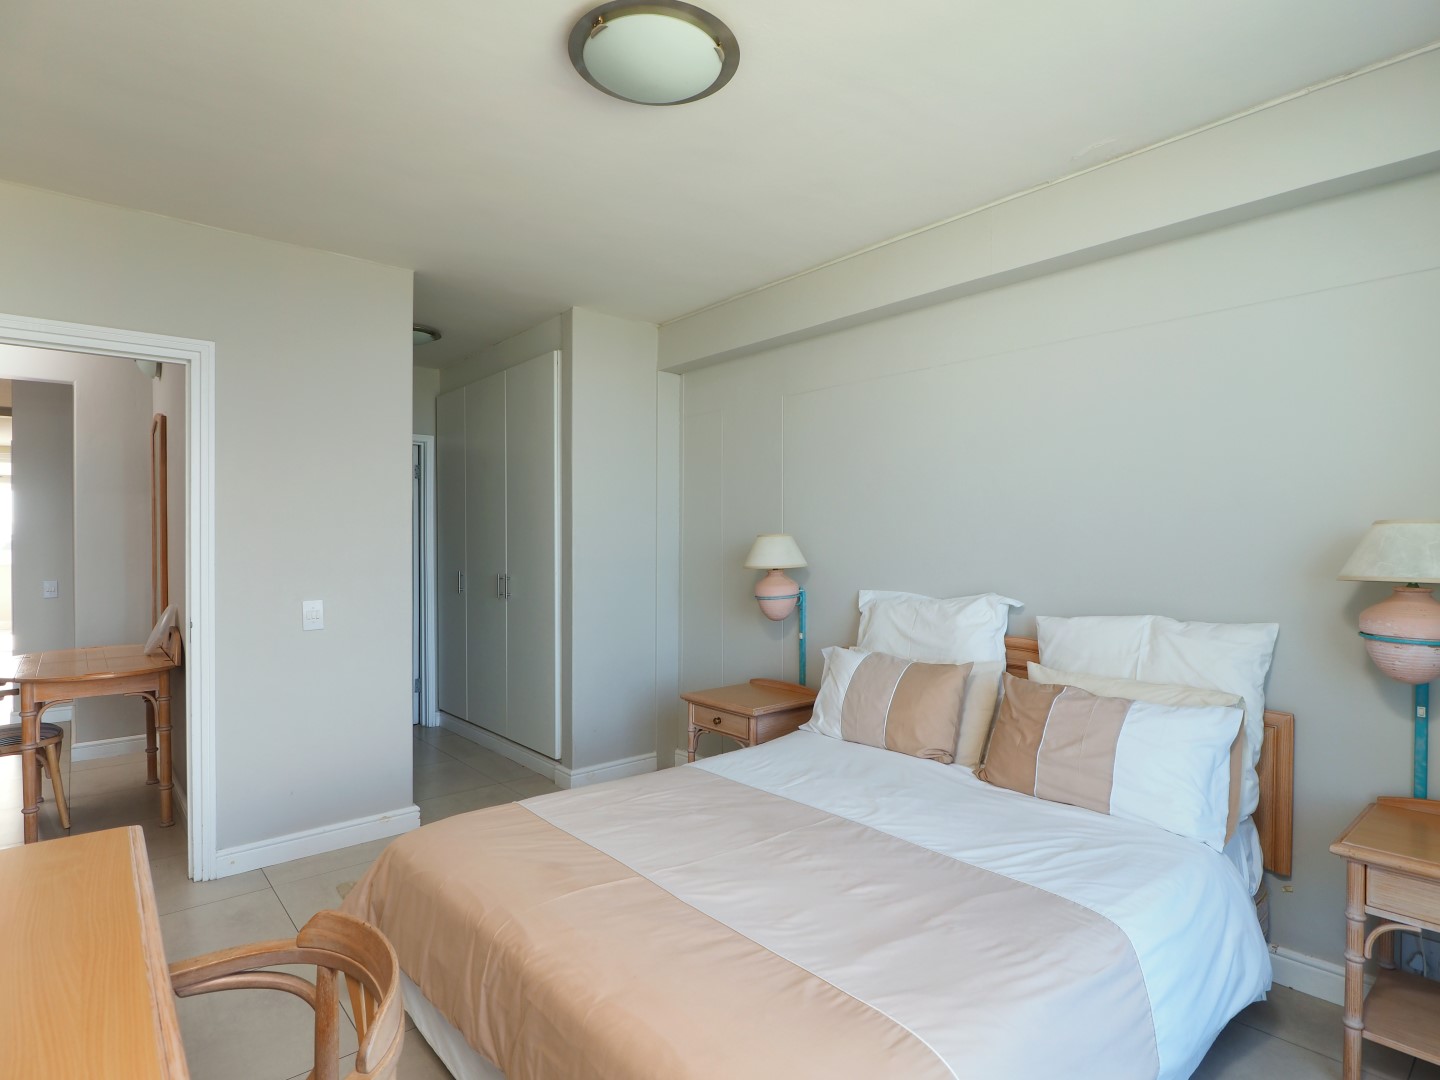 Photo 3 of Dolphin Beach Beauty accommodation in Bloubergstrand, Cape Town with 3 bedrooms and 2 bathrooms